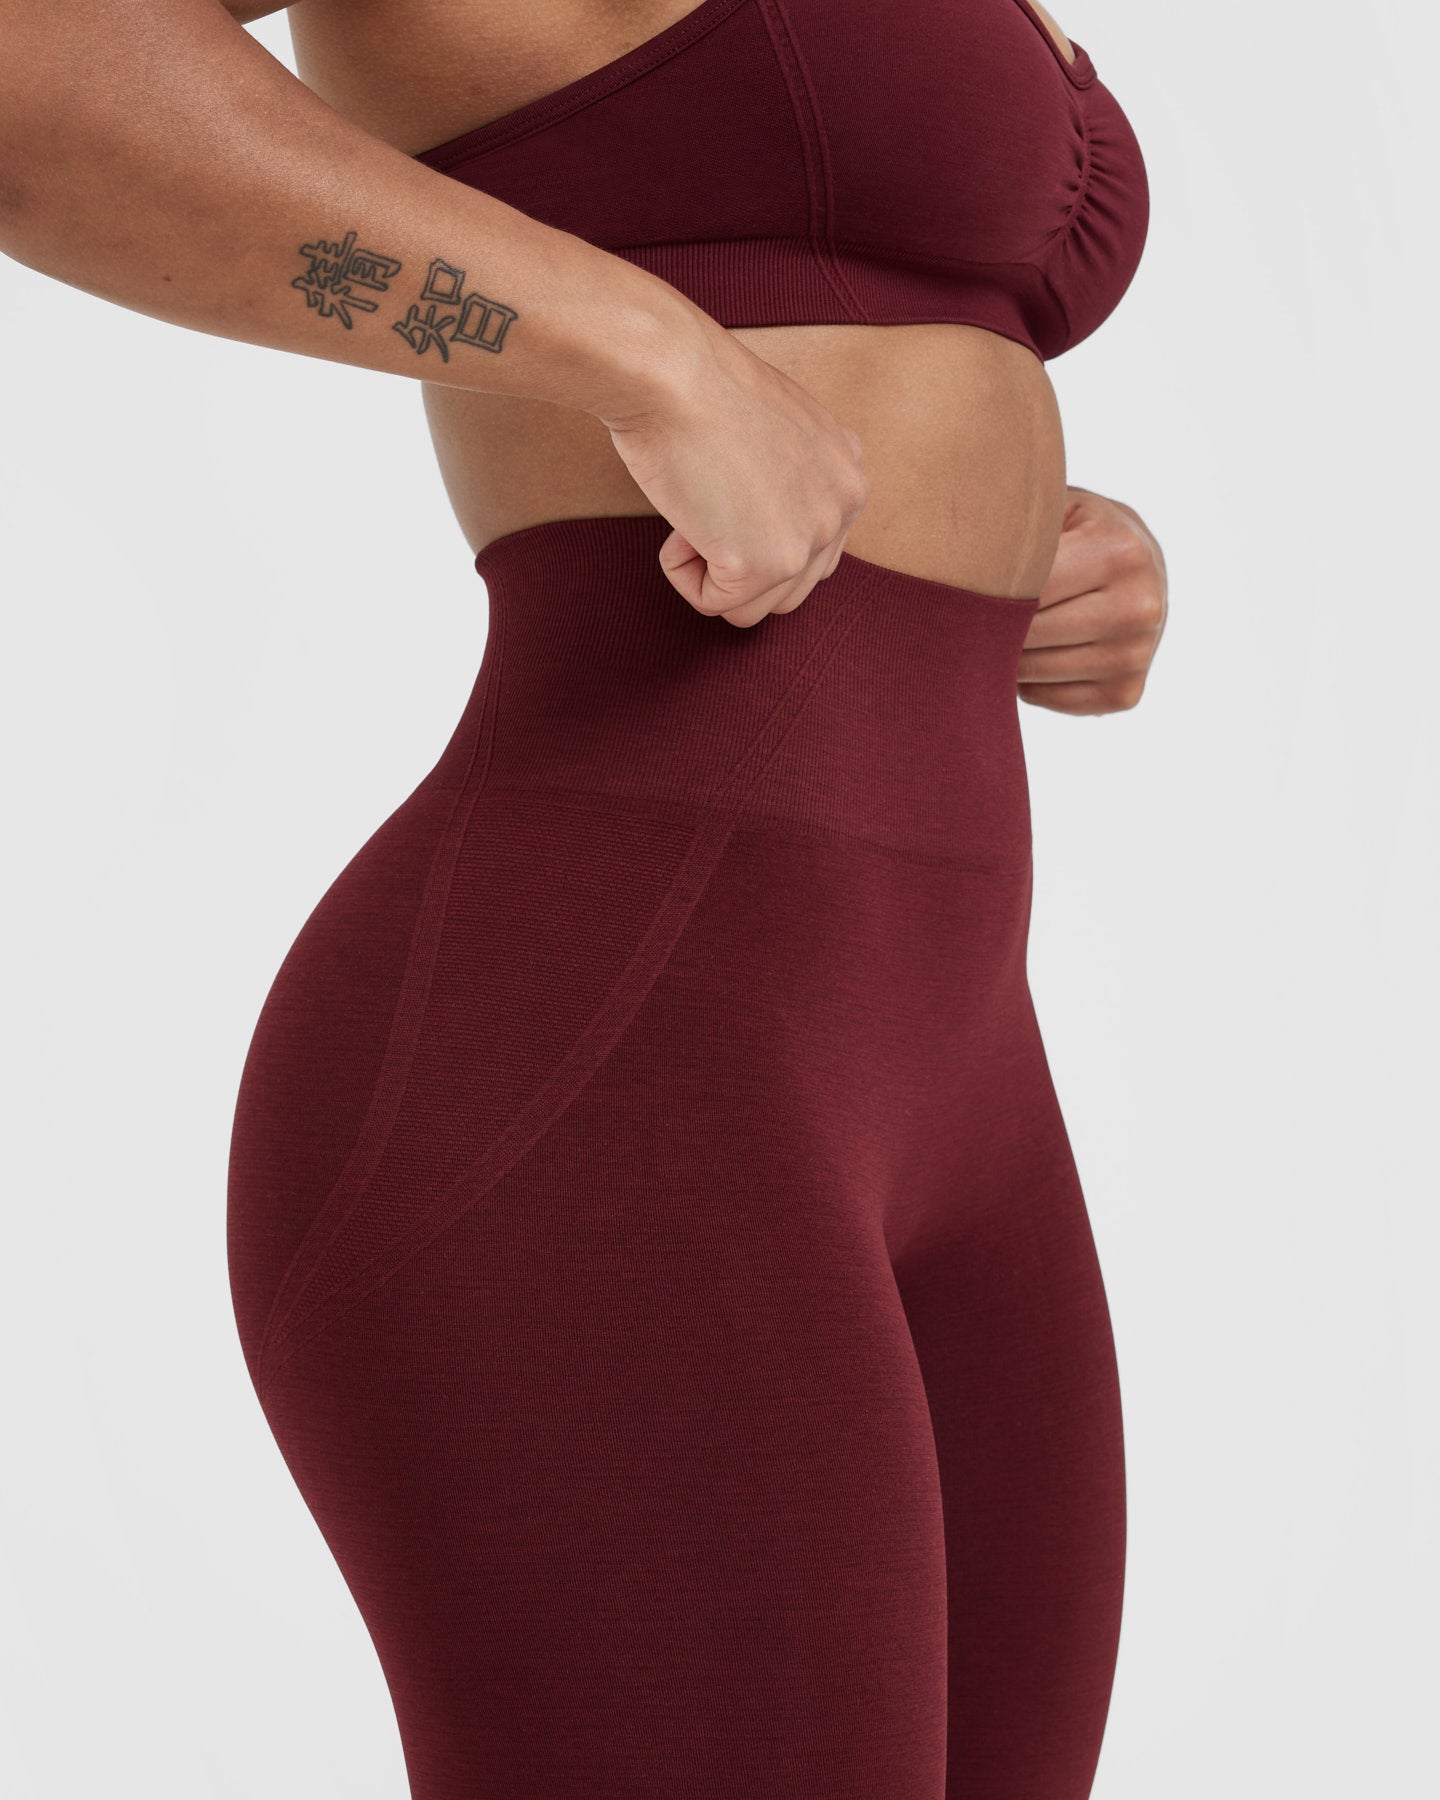 LOVELIFE Womens Yoga Oner Active Leggings Full Length With Side Pockets,  High Waisted Buttery Soft Yoga Pant 28 Inch Inseam From Kong003, $19.57